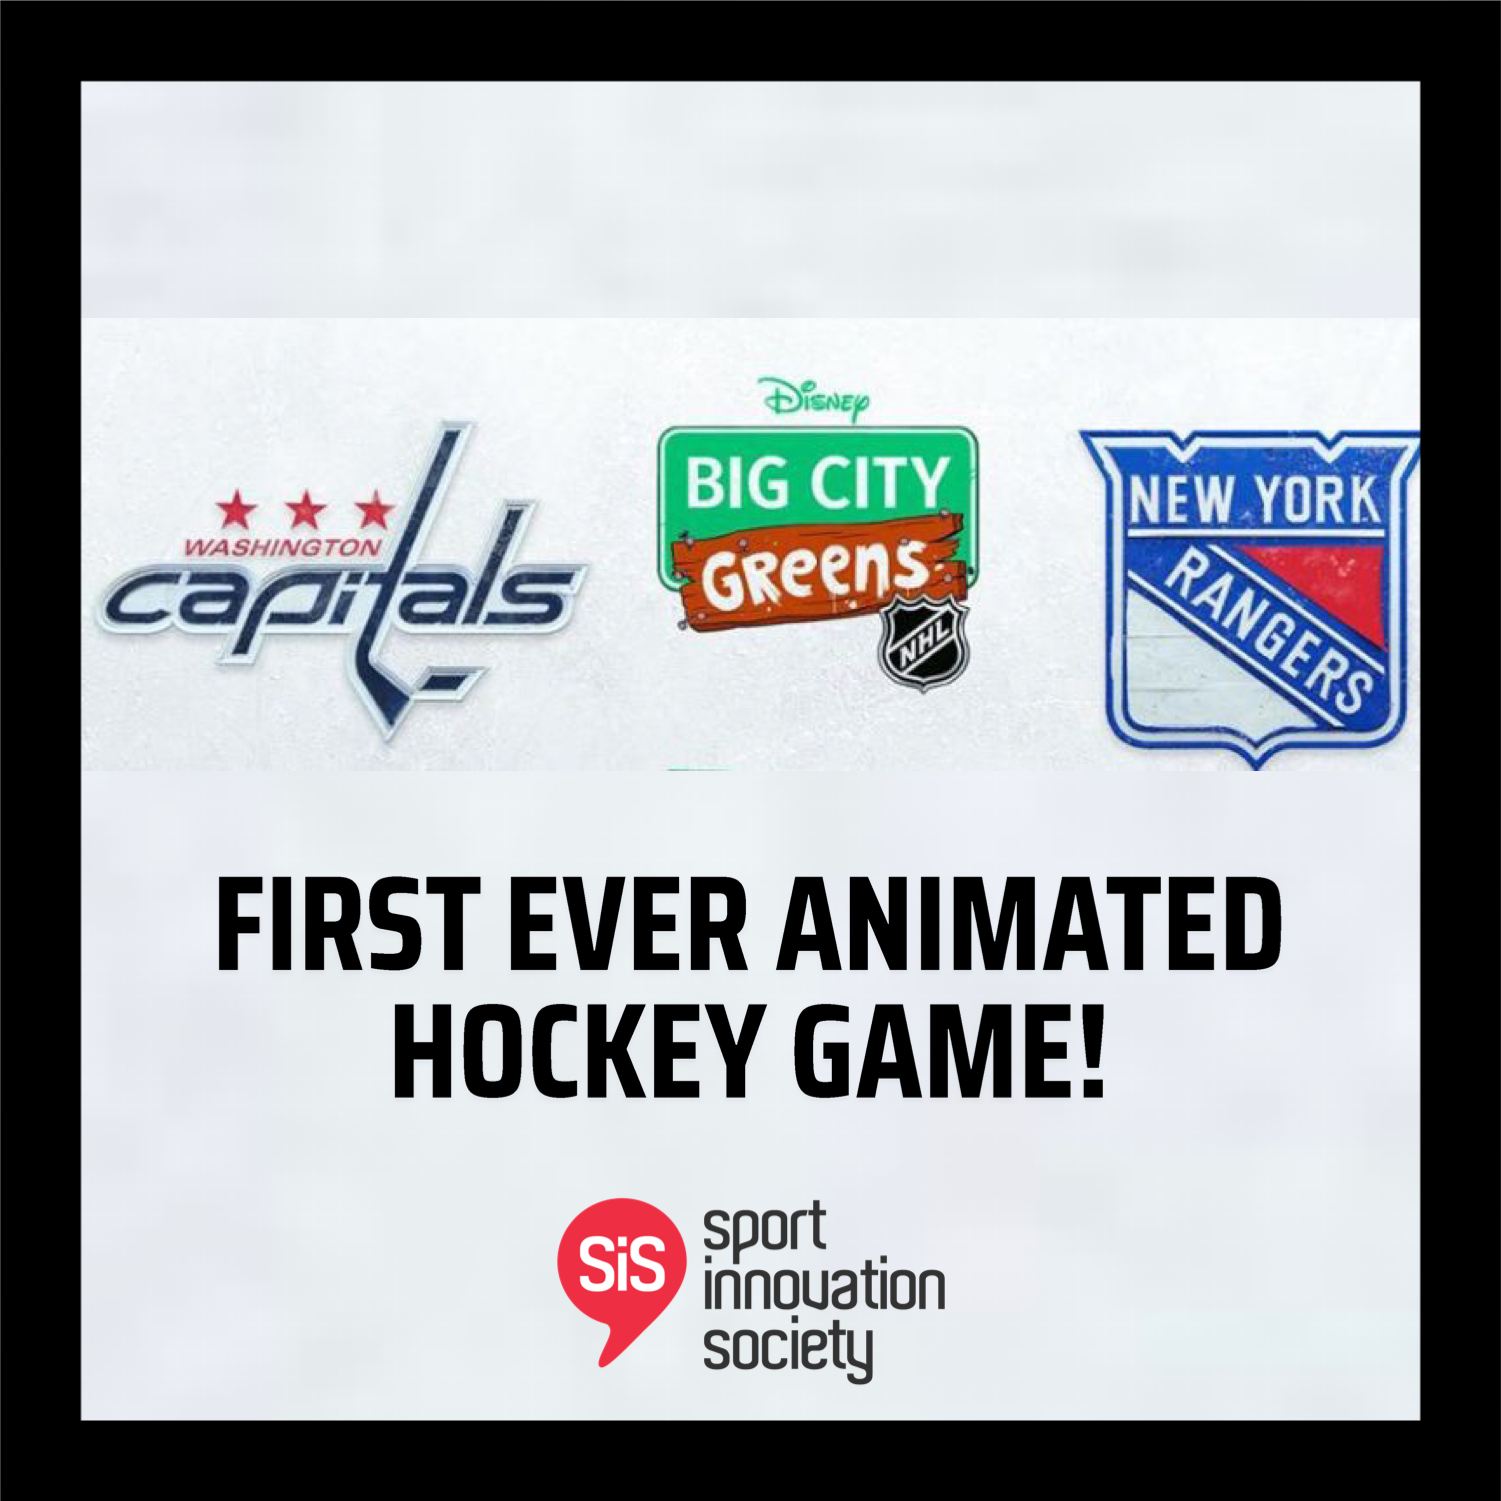 NHL and Big City Greens Team Up for First-Ever Animated Hockey Game!